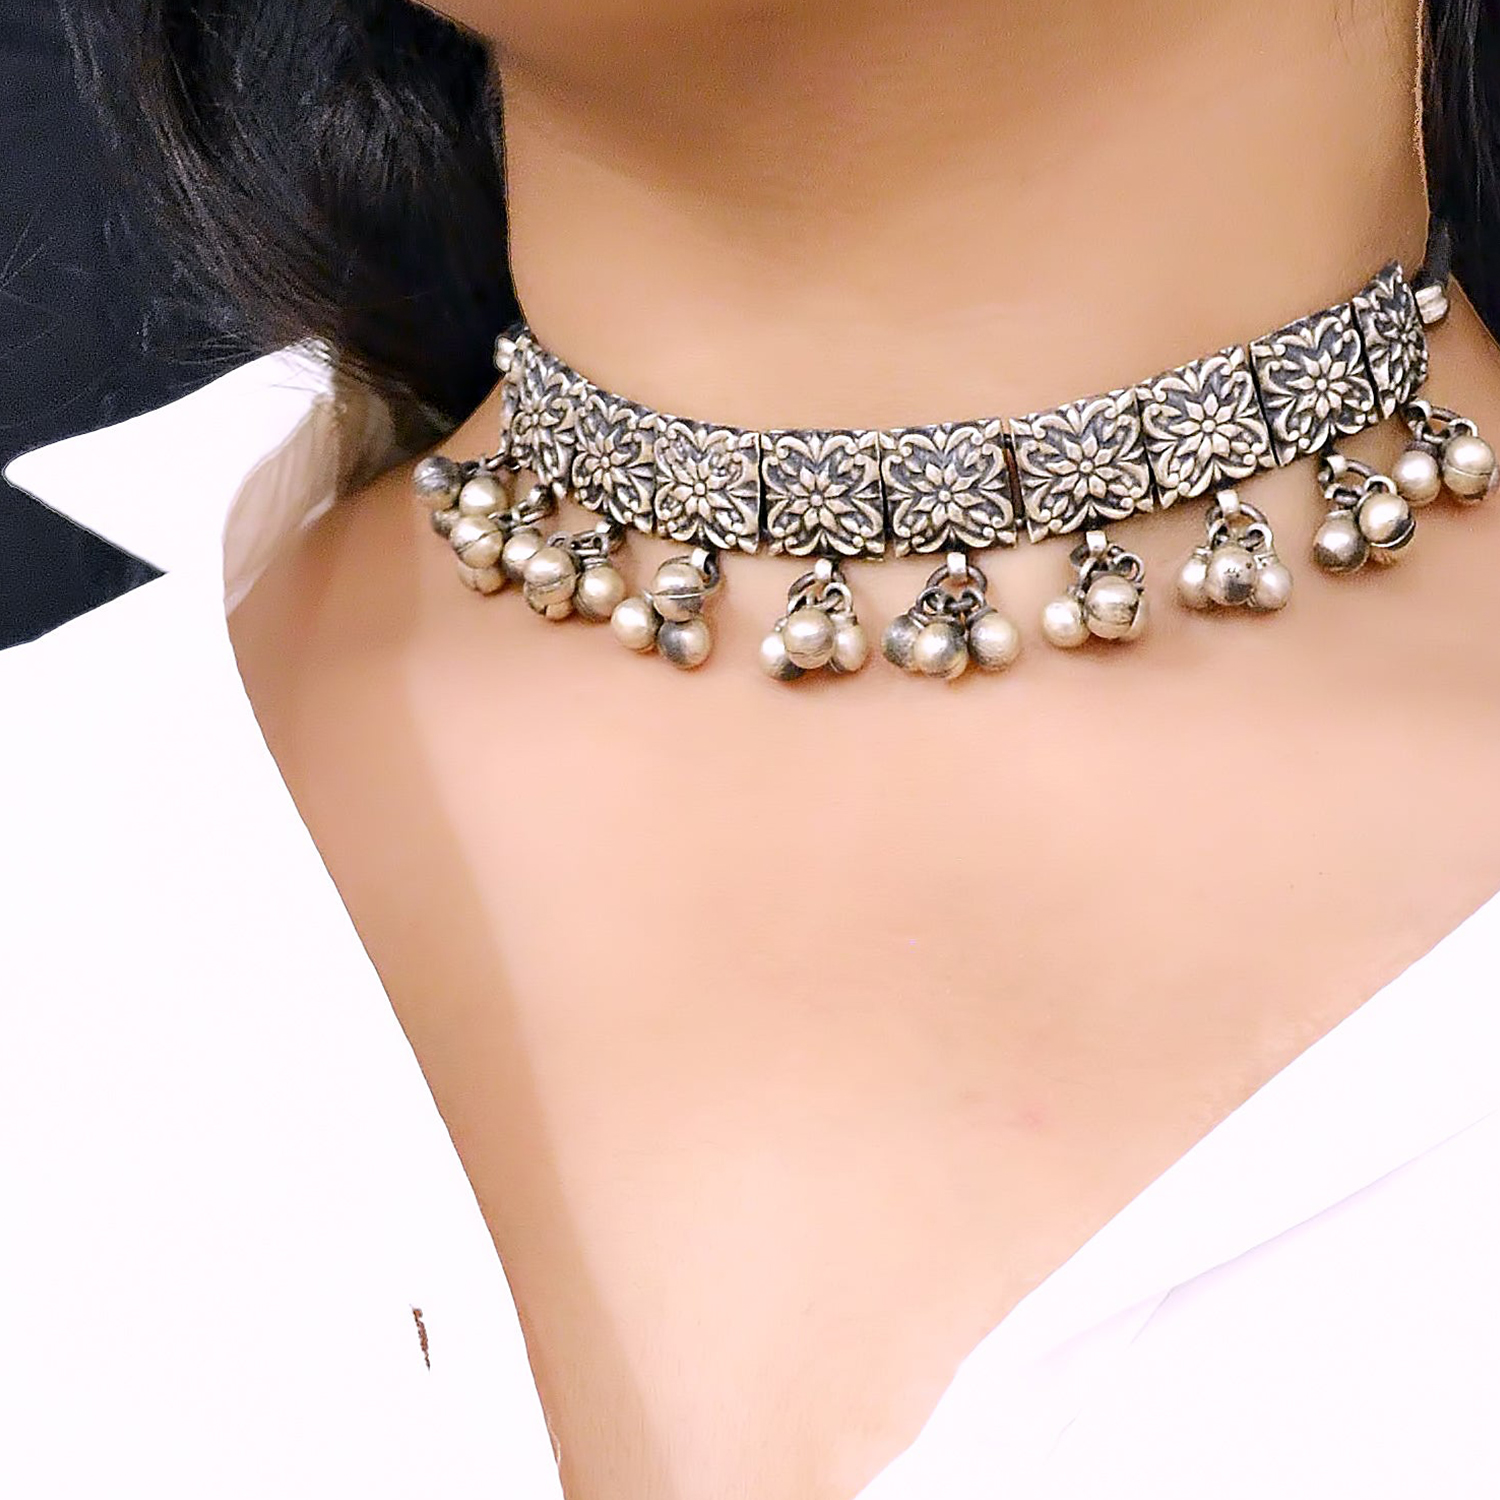 Handcrafted Beautiful Square Shaped Galabandh Flotal Design Choker